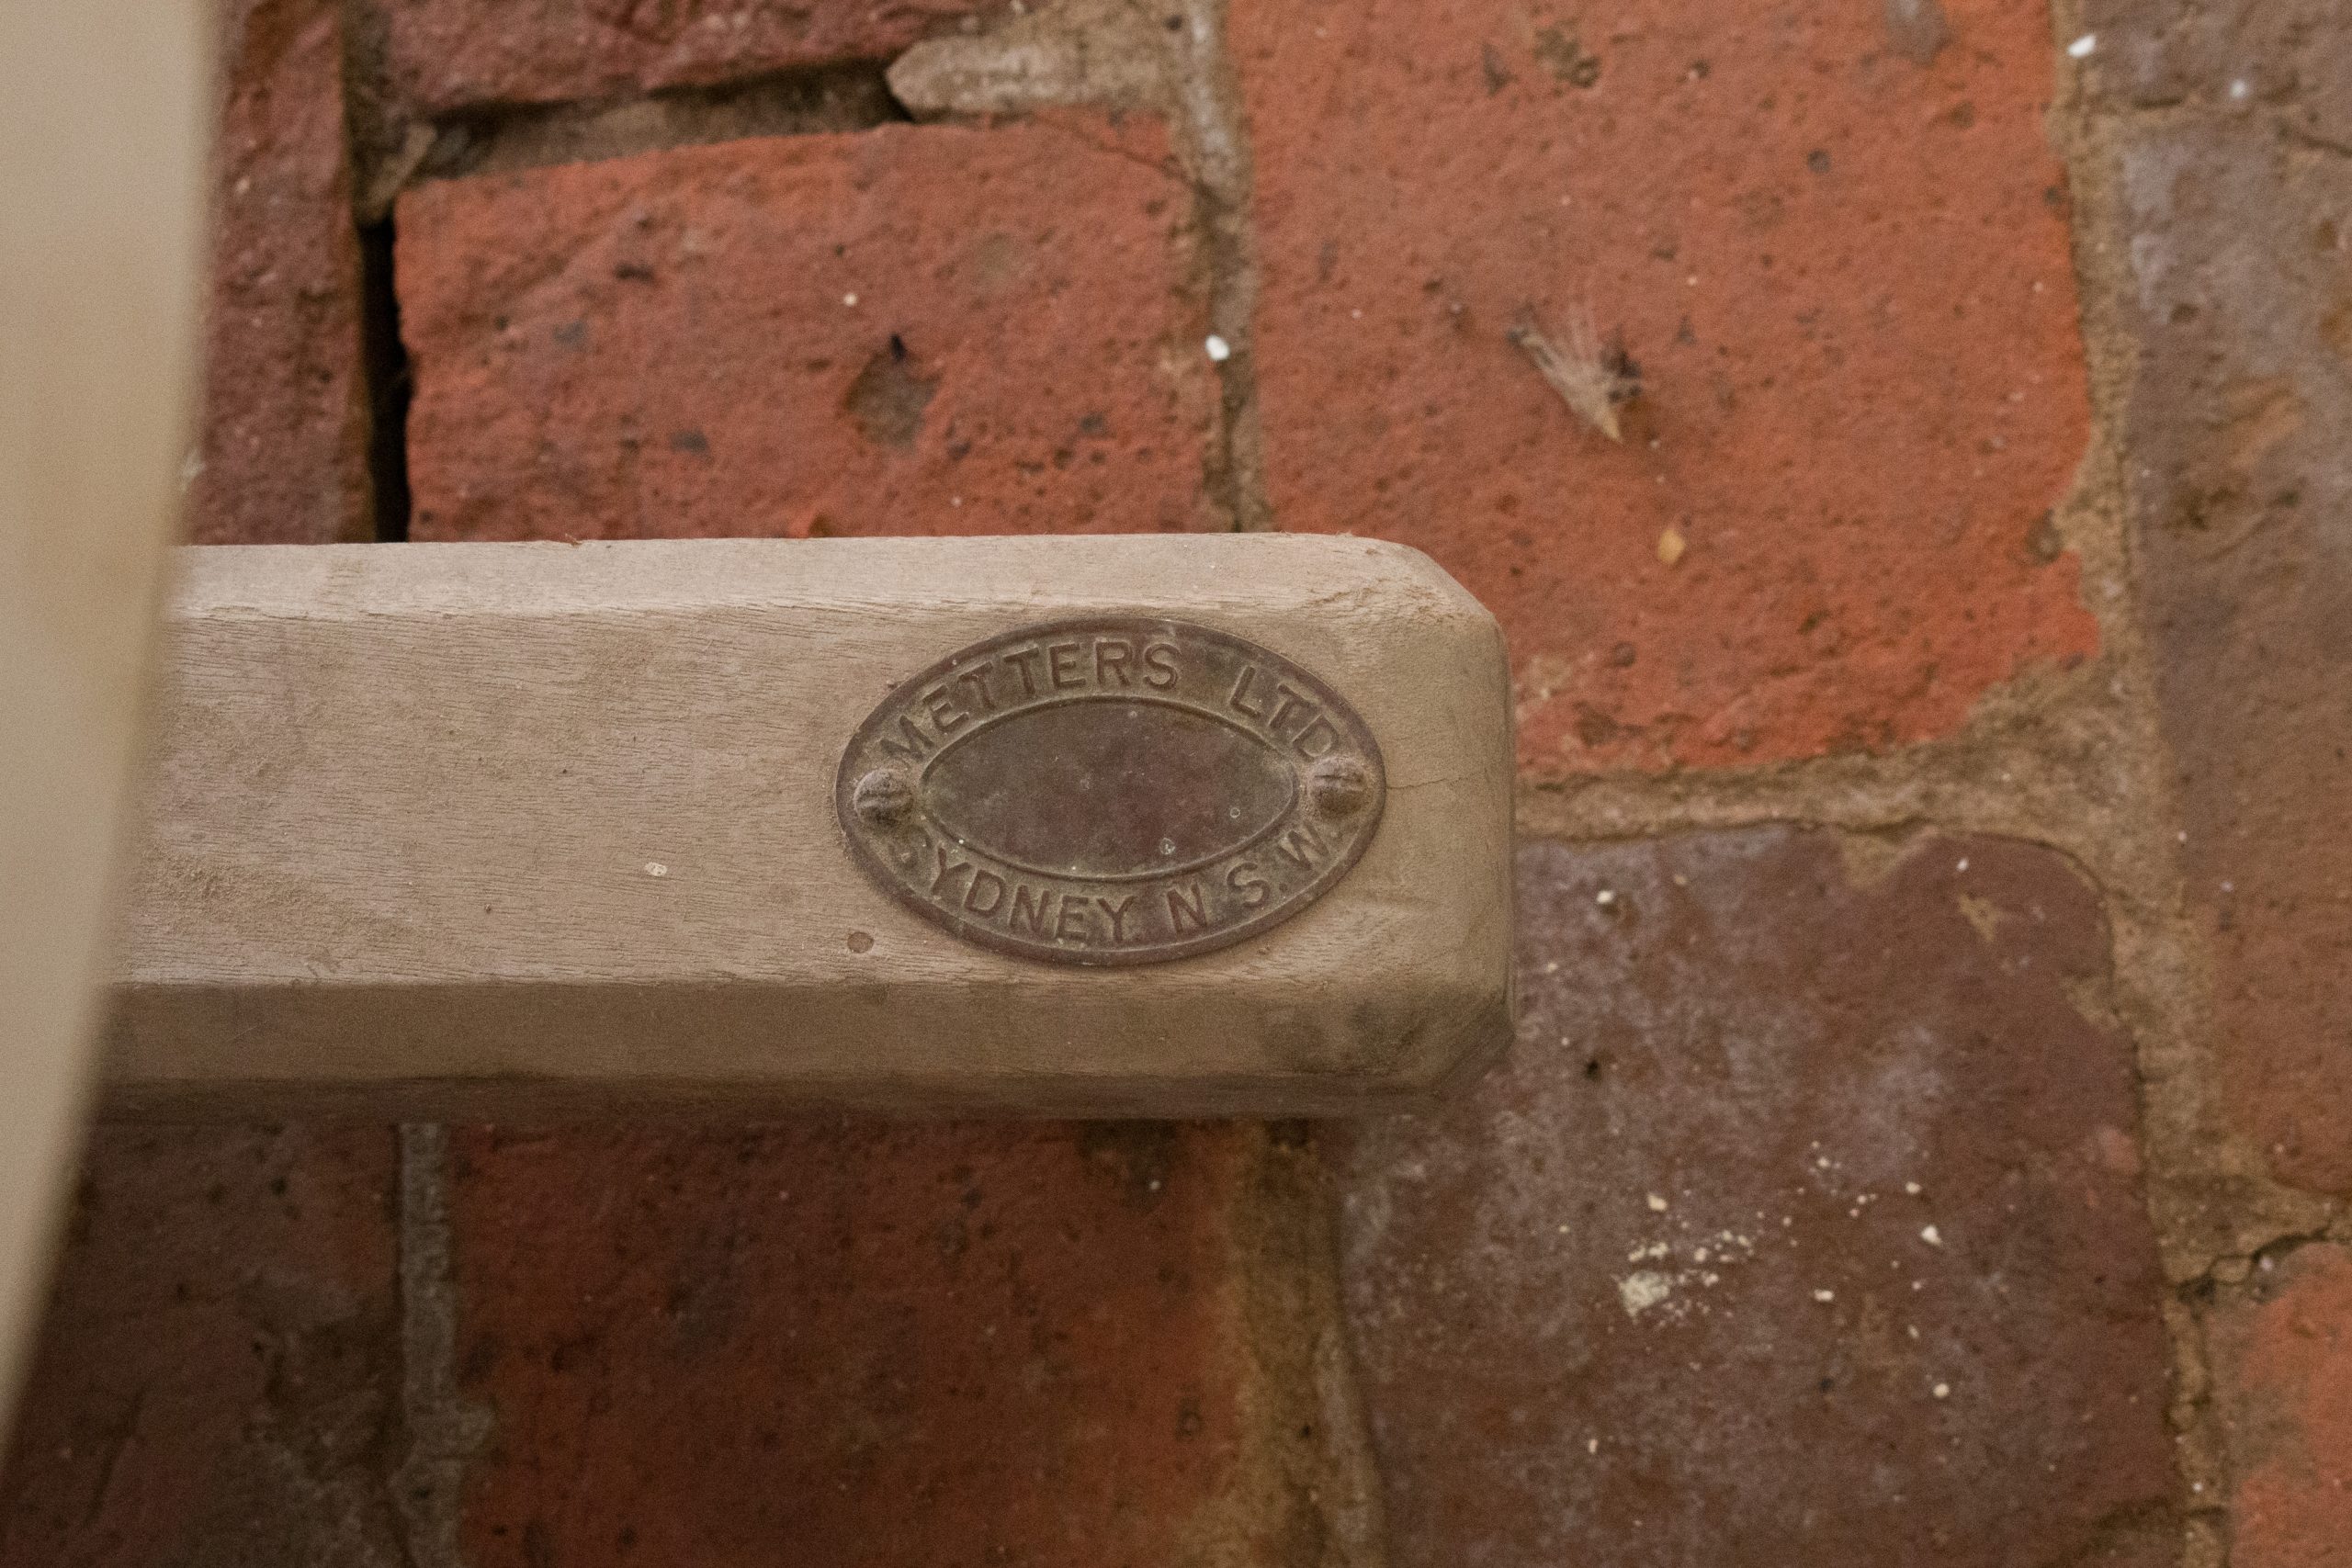 close up of maker's mark on stand, it reads'METTERS LTD SYDNEY NSW'